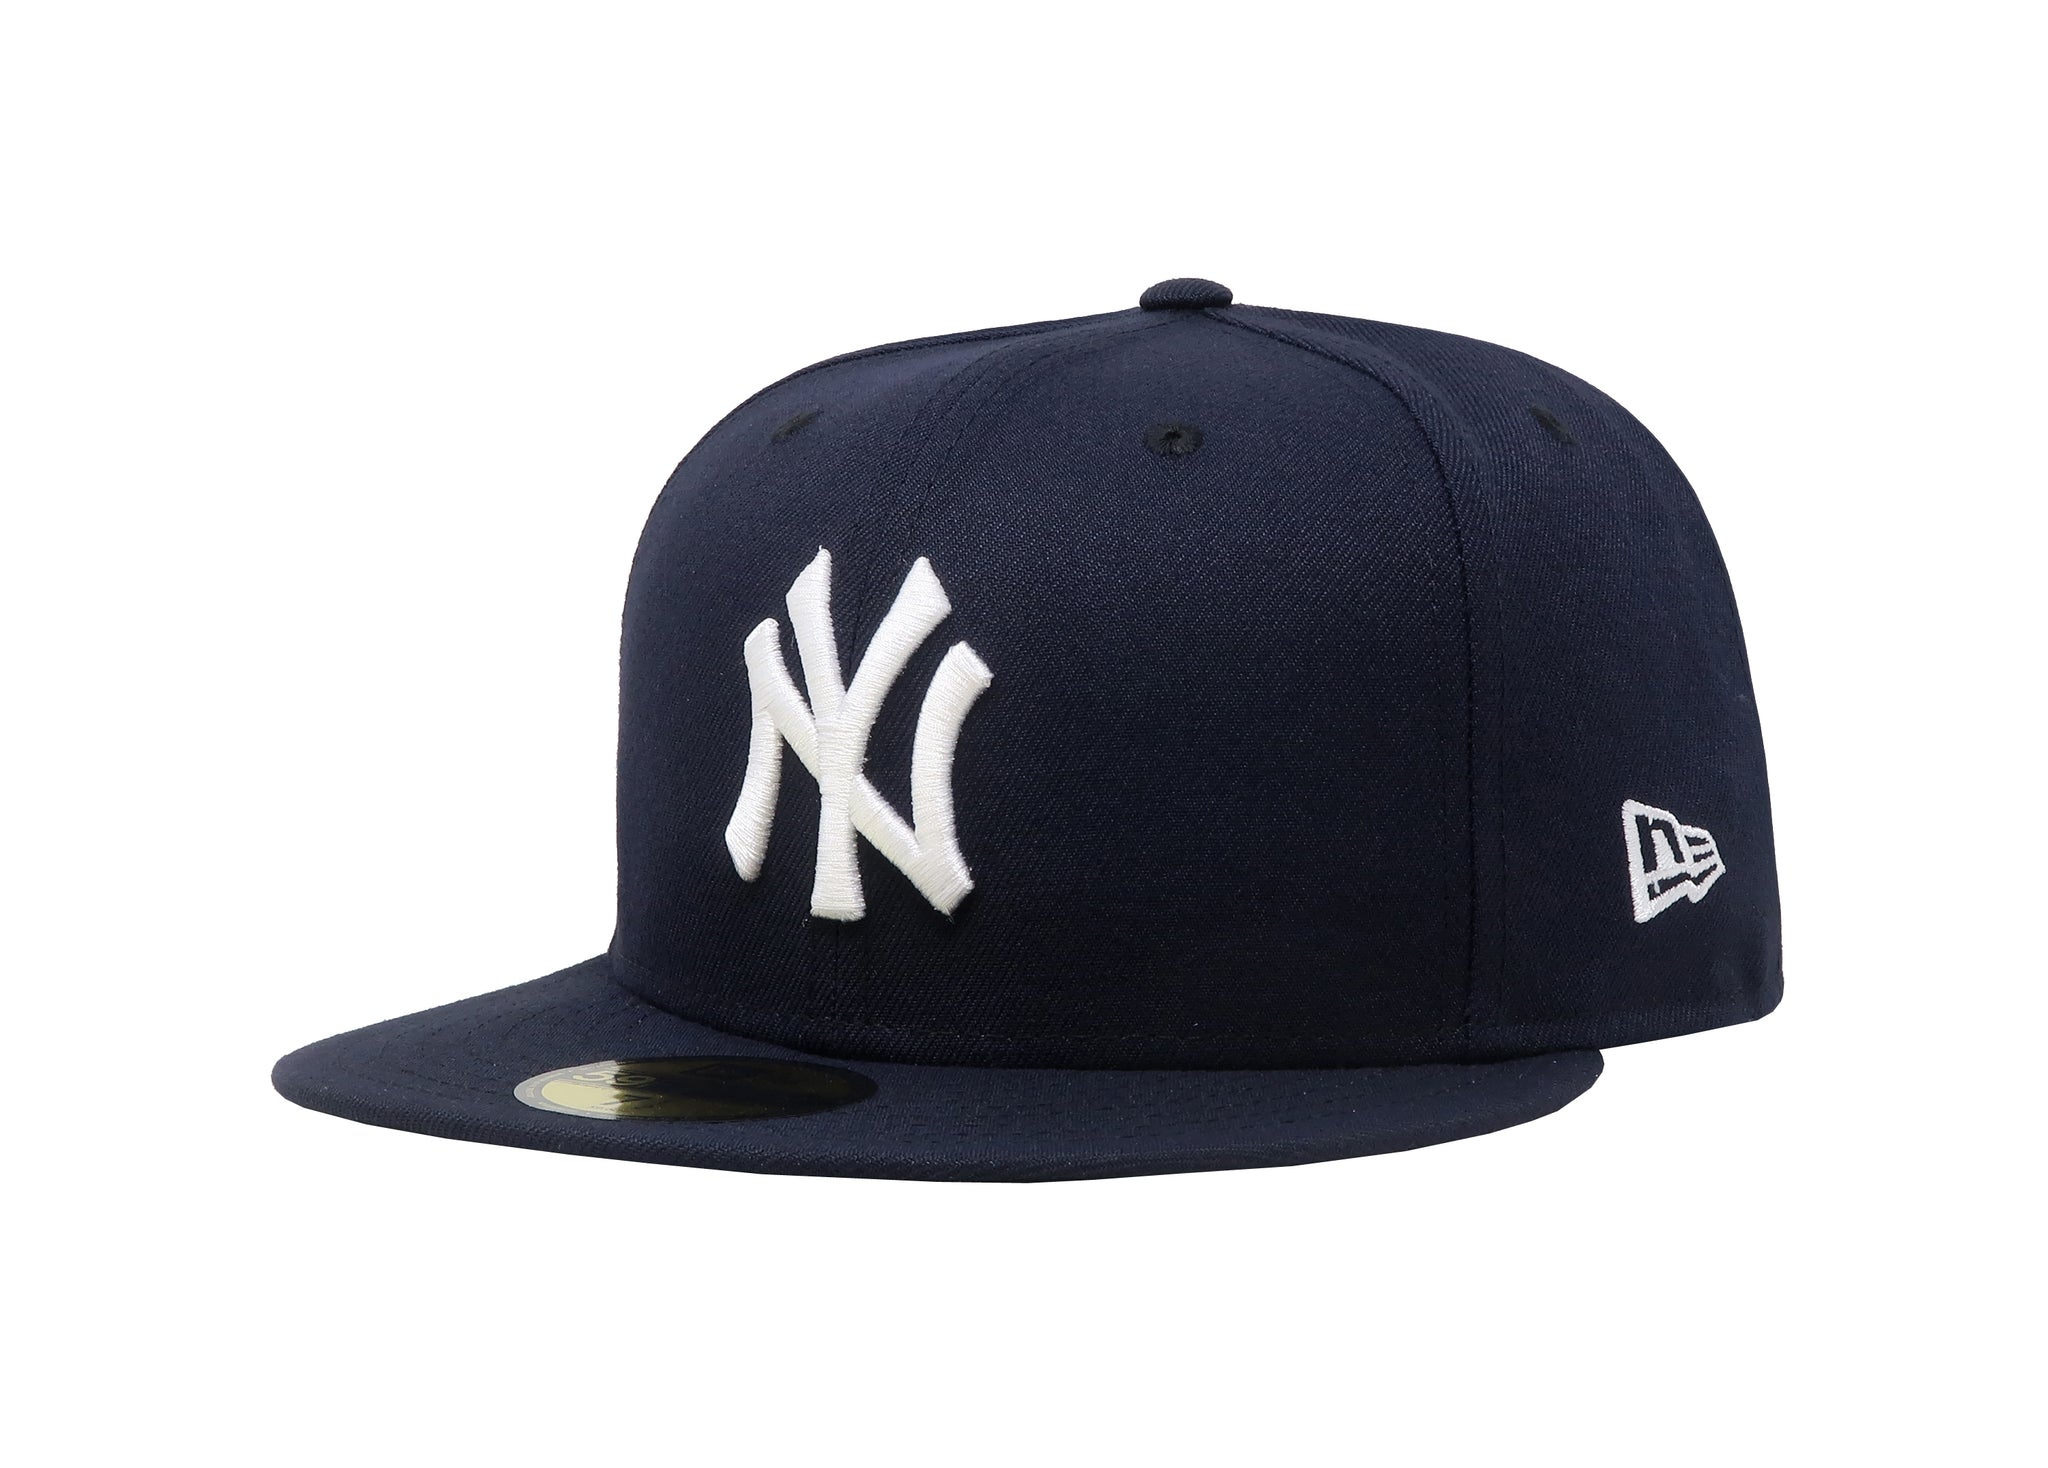 New Era Men's MLB 59Fifty New York Yankees Navy Blue Fitted Hat